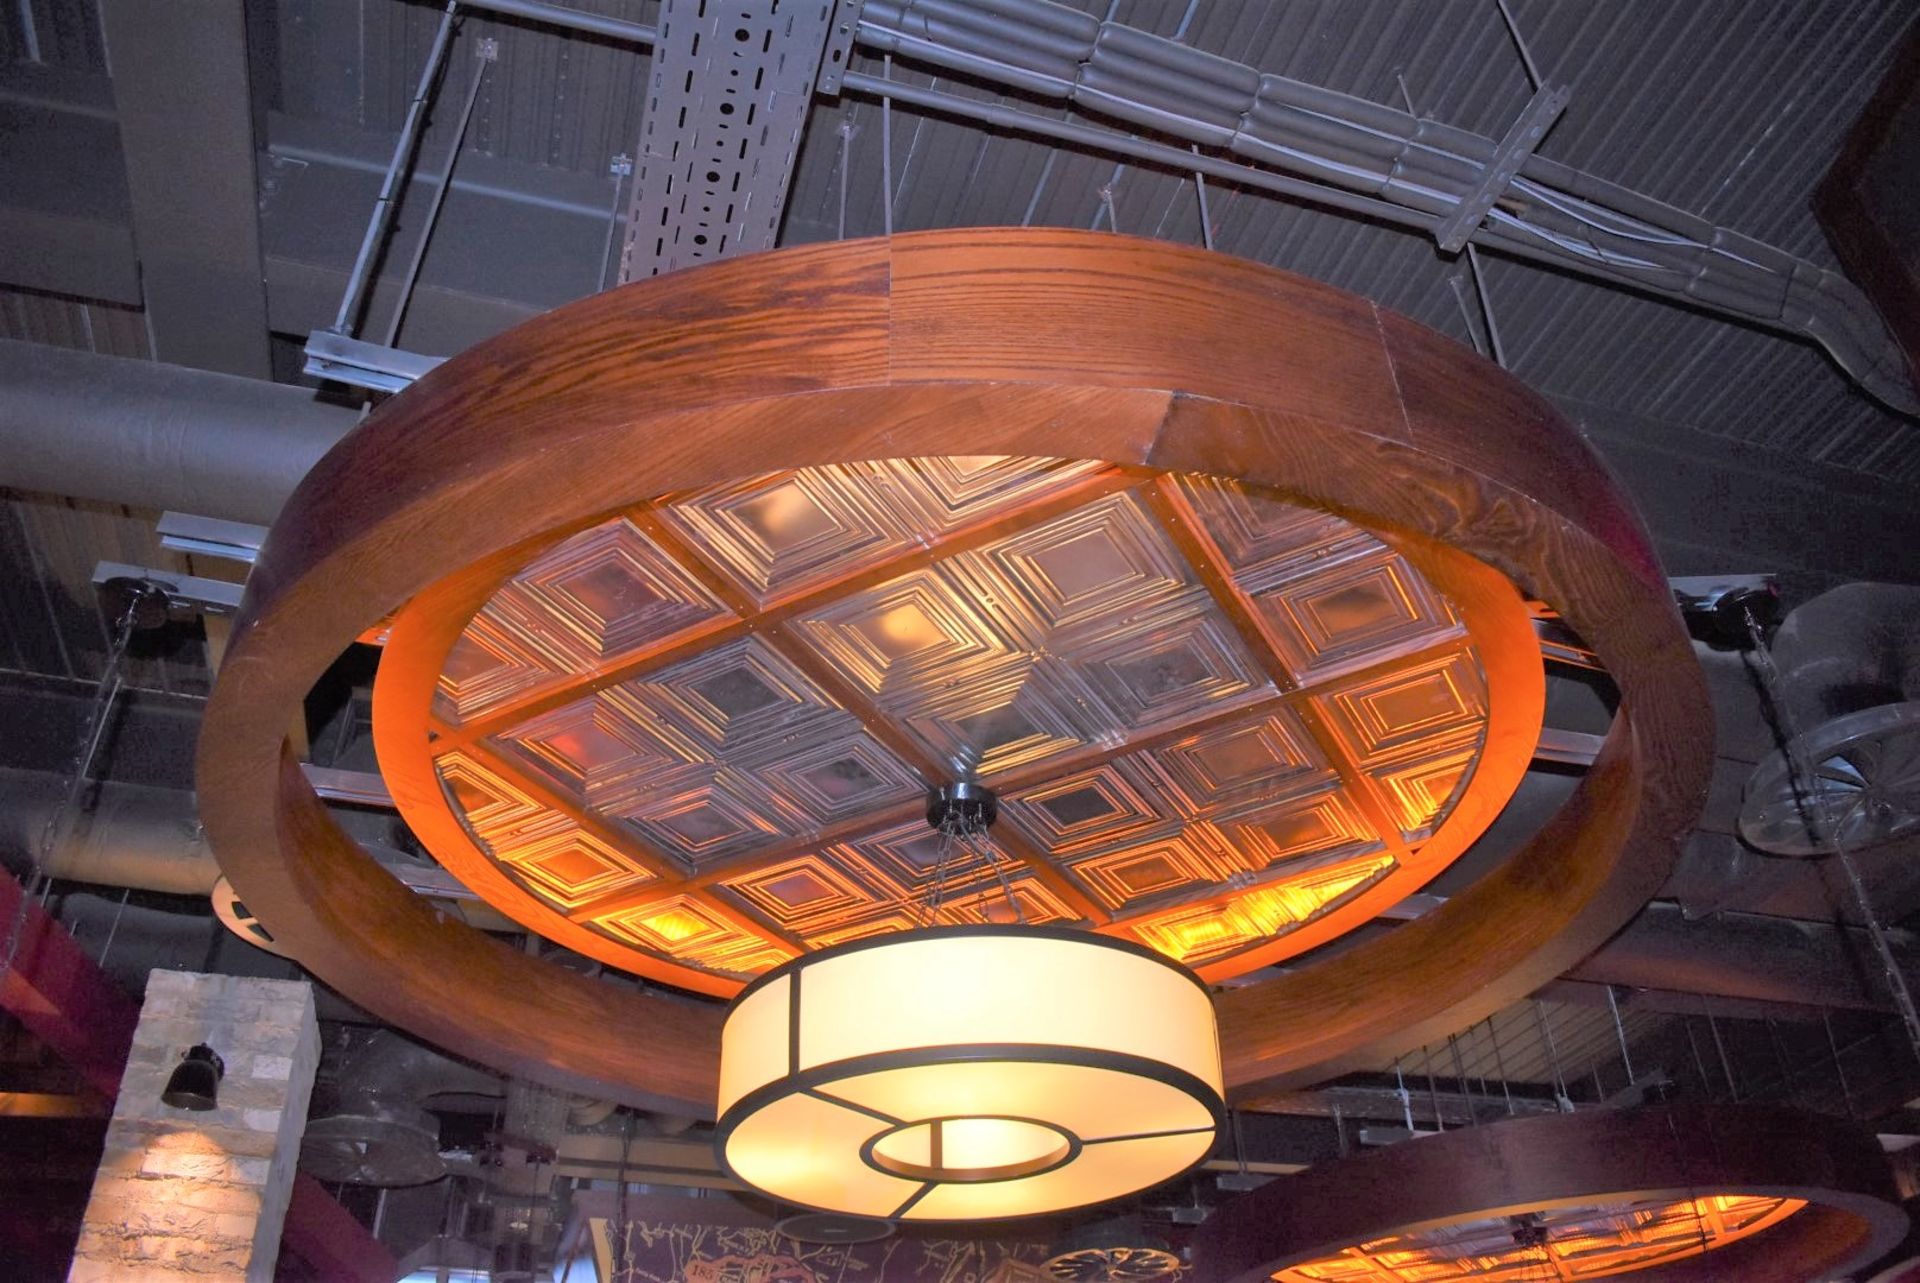 1 x Bespoke Suspended Round Ceiling Panel in Dark Wood With Panelling Inserts - Approx 2.6 Meter - Image 2 of 6